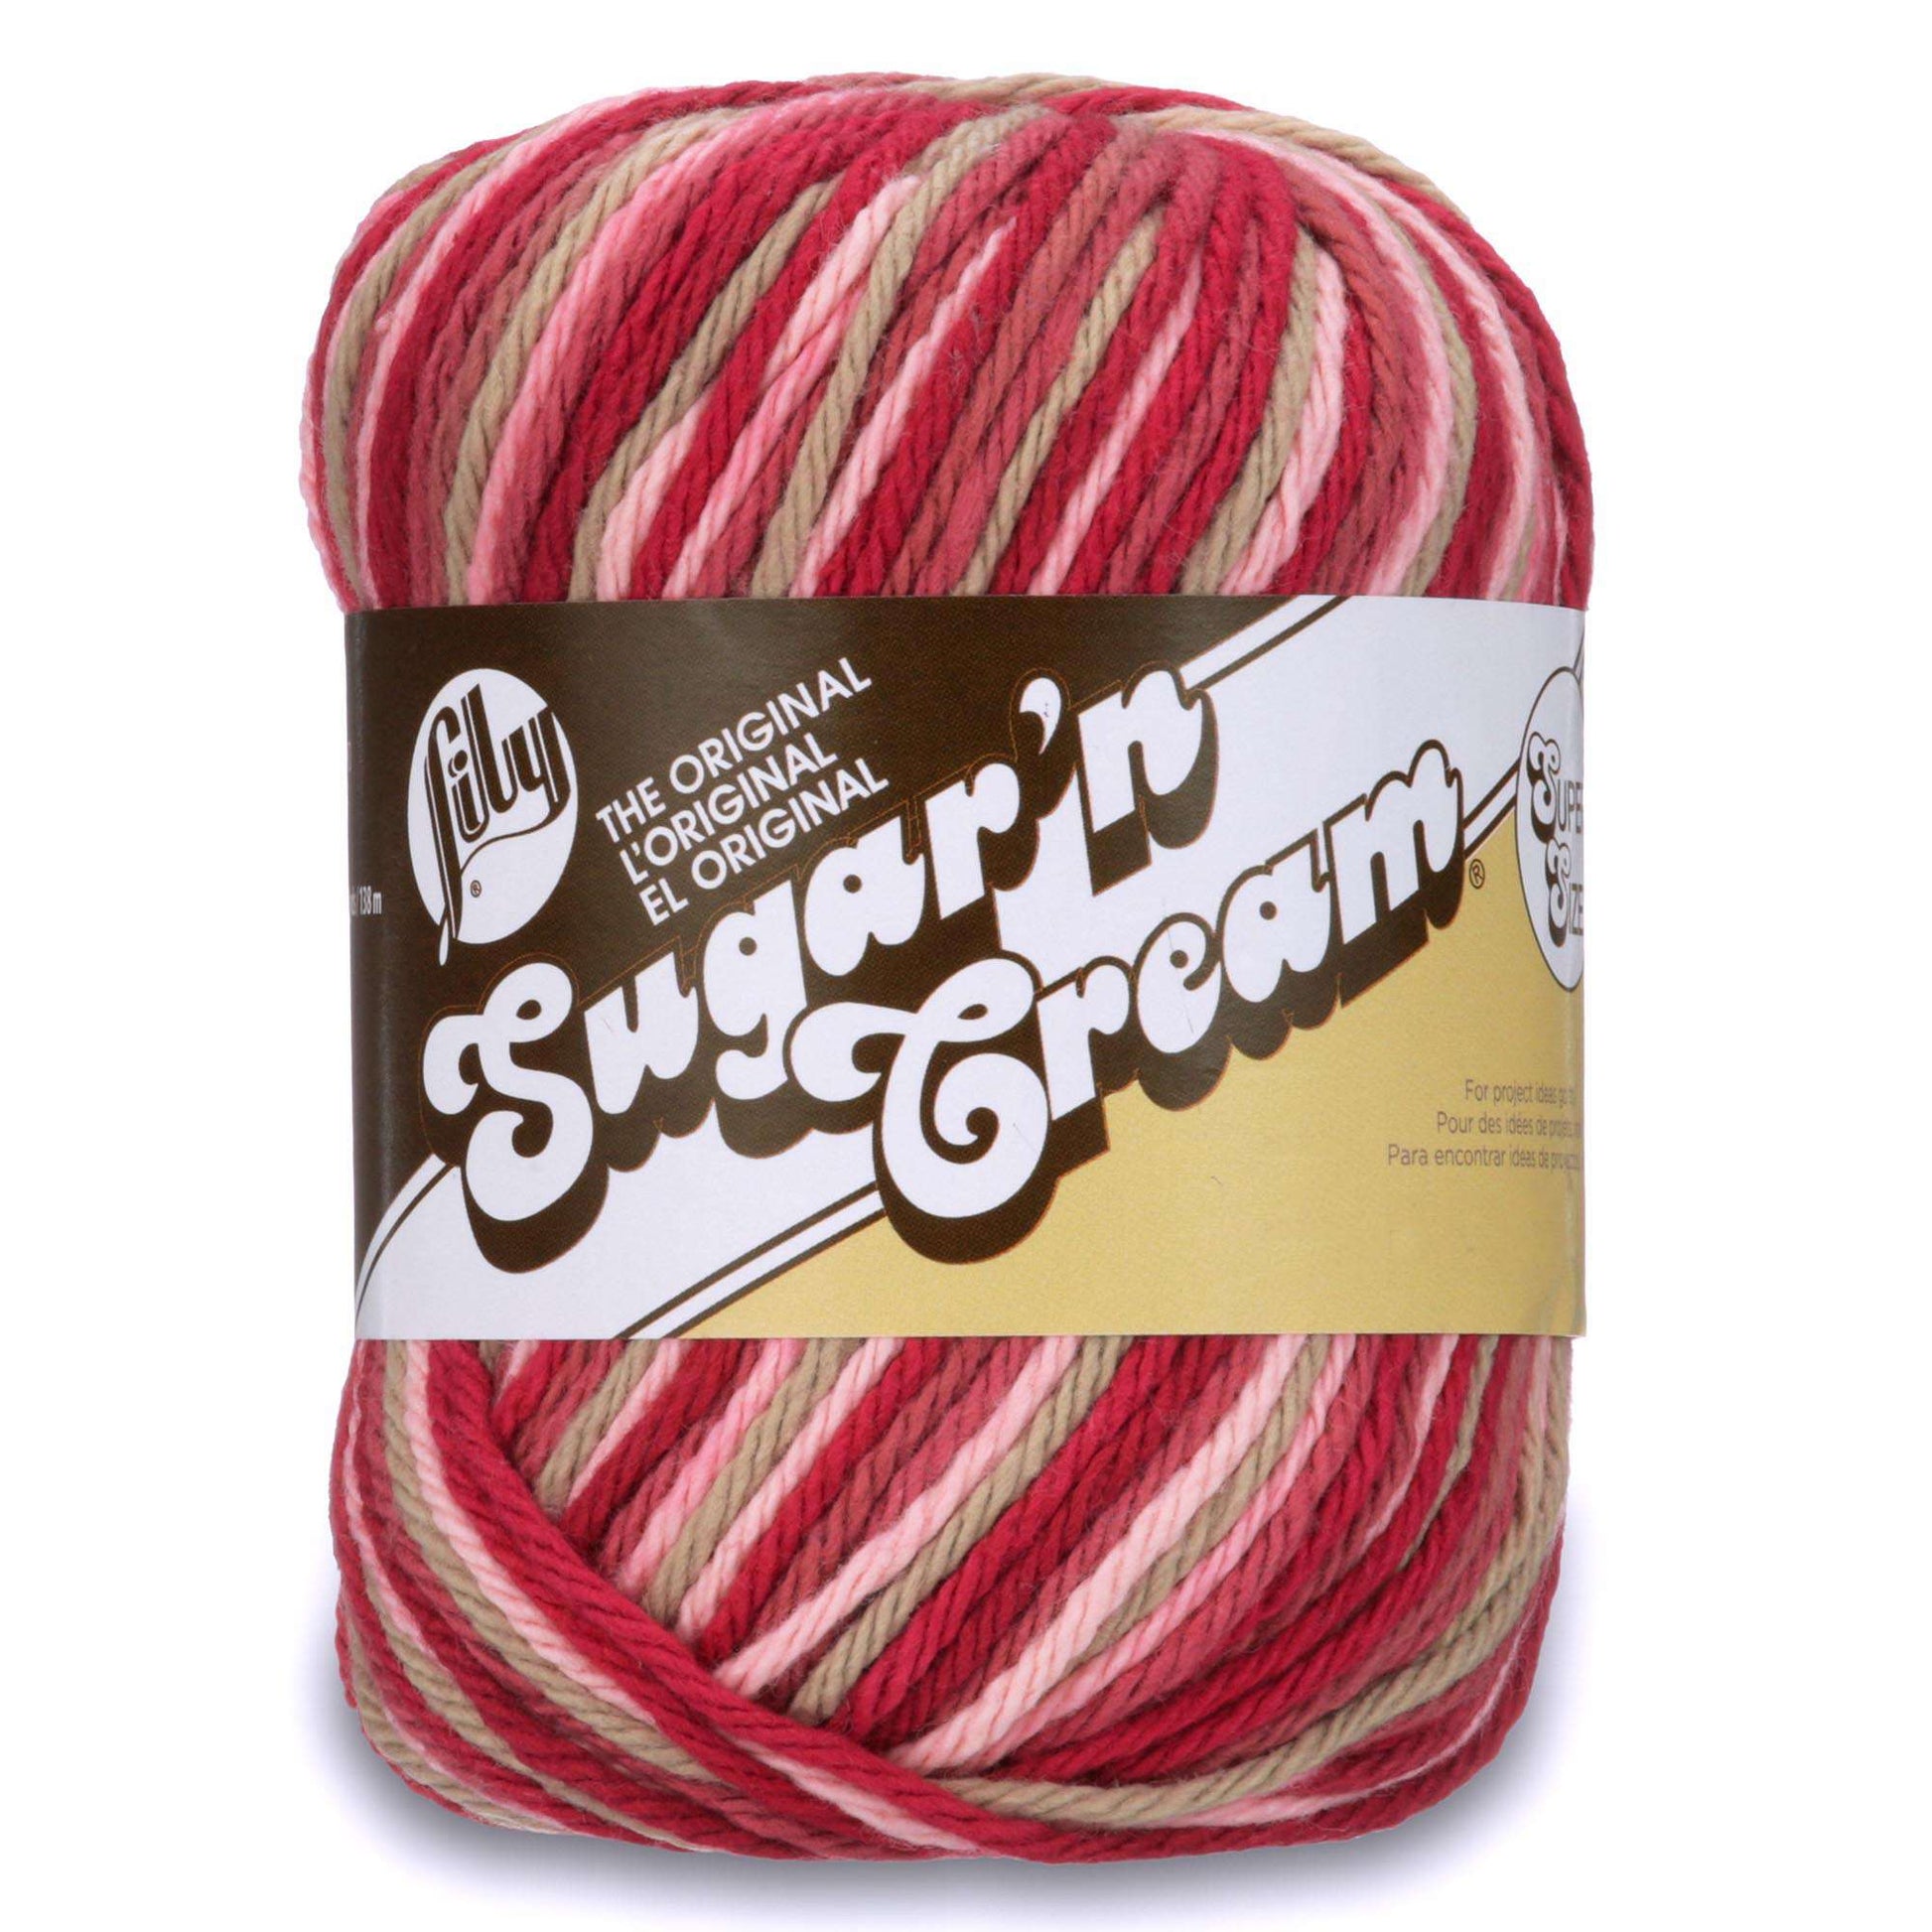 Lily Sugar'n Cream Super Size Ombres Yarn Damask Ombre